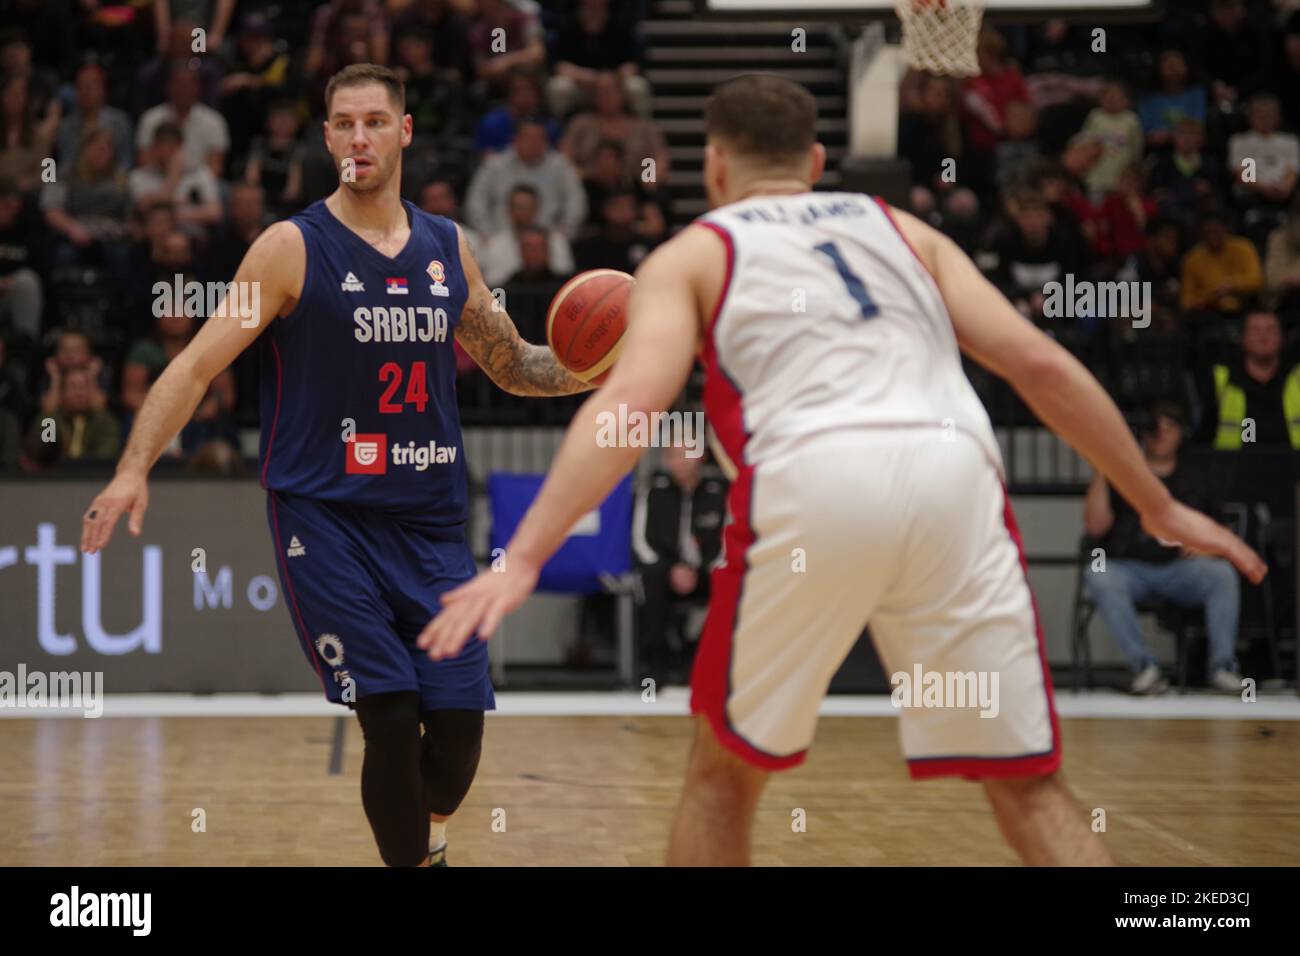 Newcastle upon Tyne, England, 11 November 2022. Stefan Jovic playing for Serbia against Great Britain in the FIBA Basketball World Cup 2023 Qualifiers at the Vertu Motors Arena. Credit: Colin Edwards/Alamy Live News Stock Photo